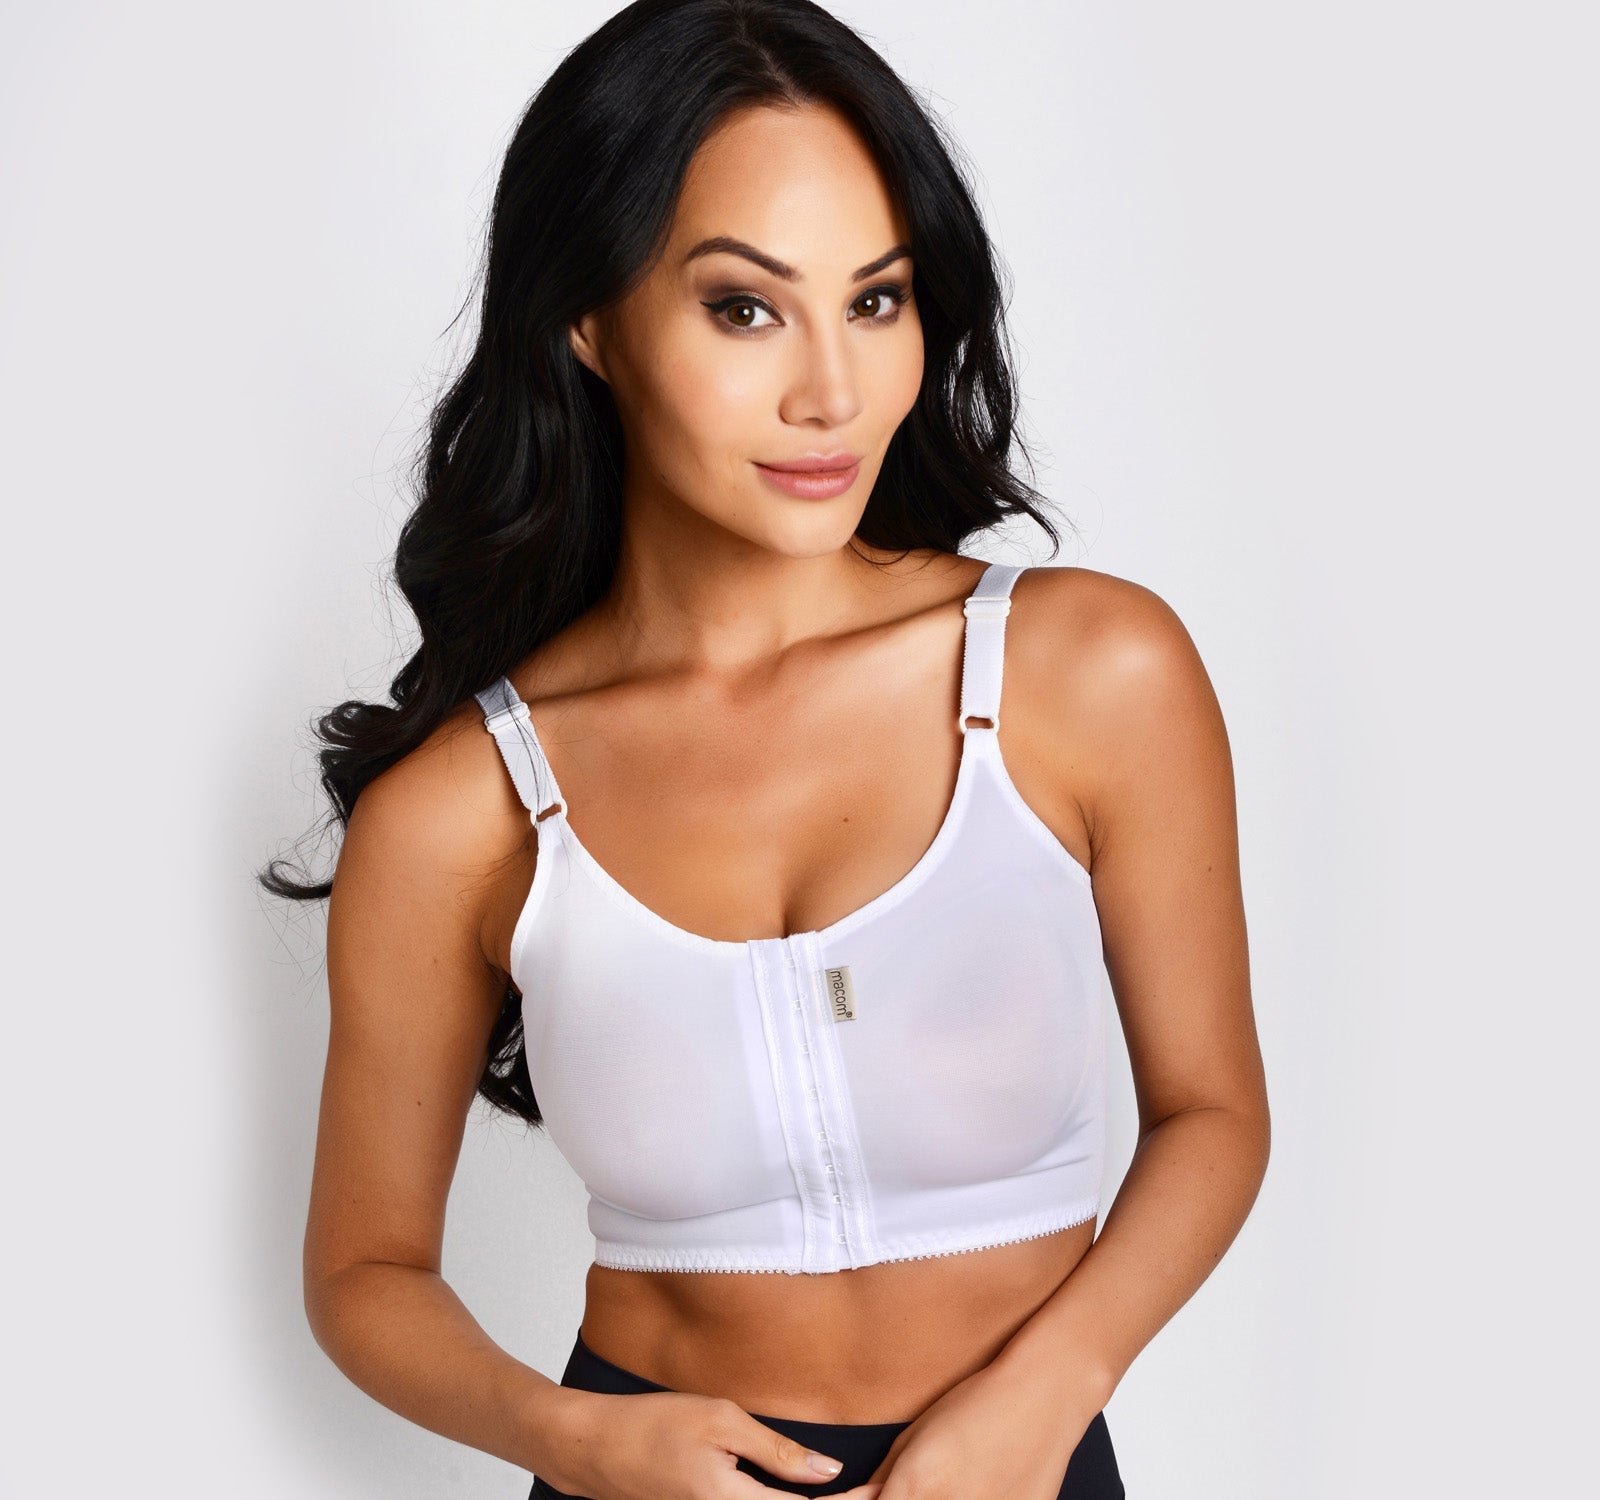 MACOM i-Bra - Best Support Post Surgery - Front Fastening - No Cup